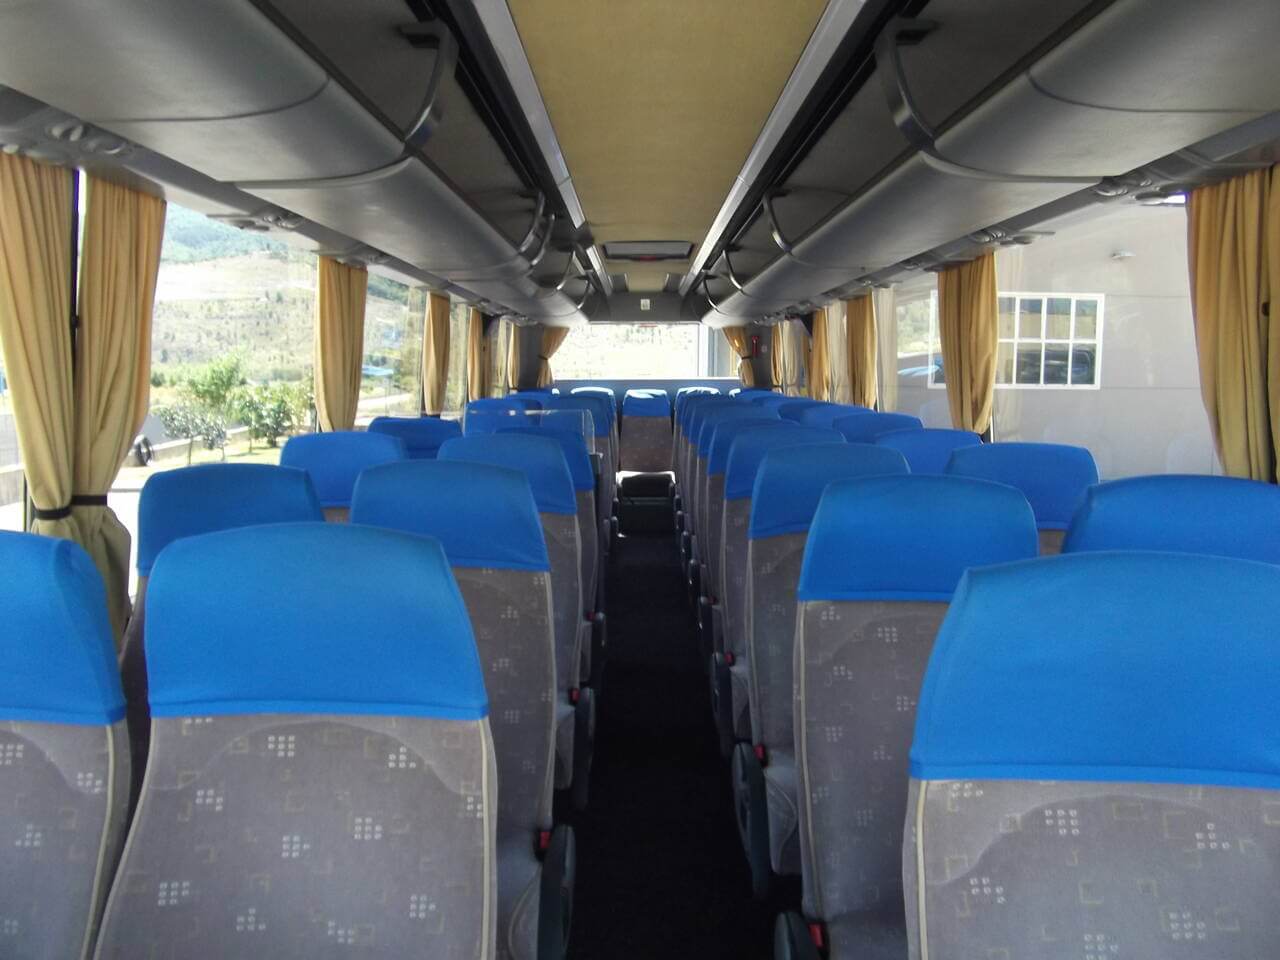 Rent a 40 seater Midibus (VDL VDL 2000) from Florentia Bus srl from Firenze 